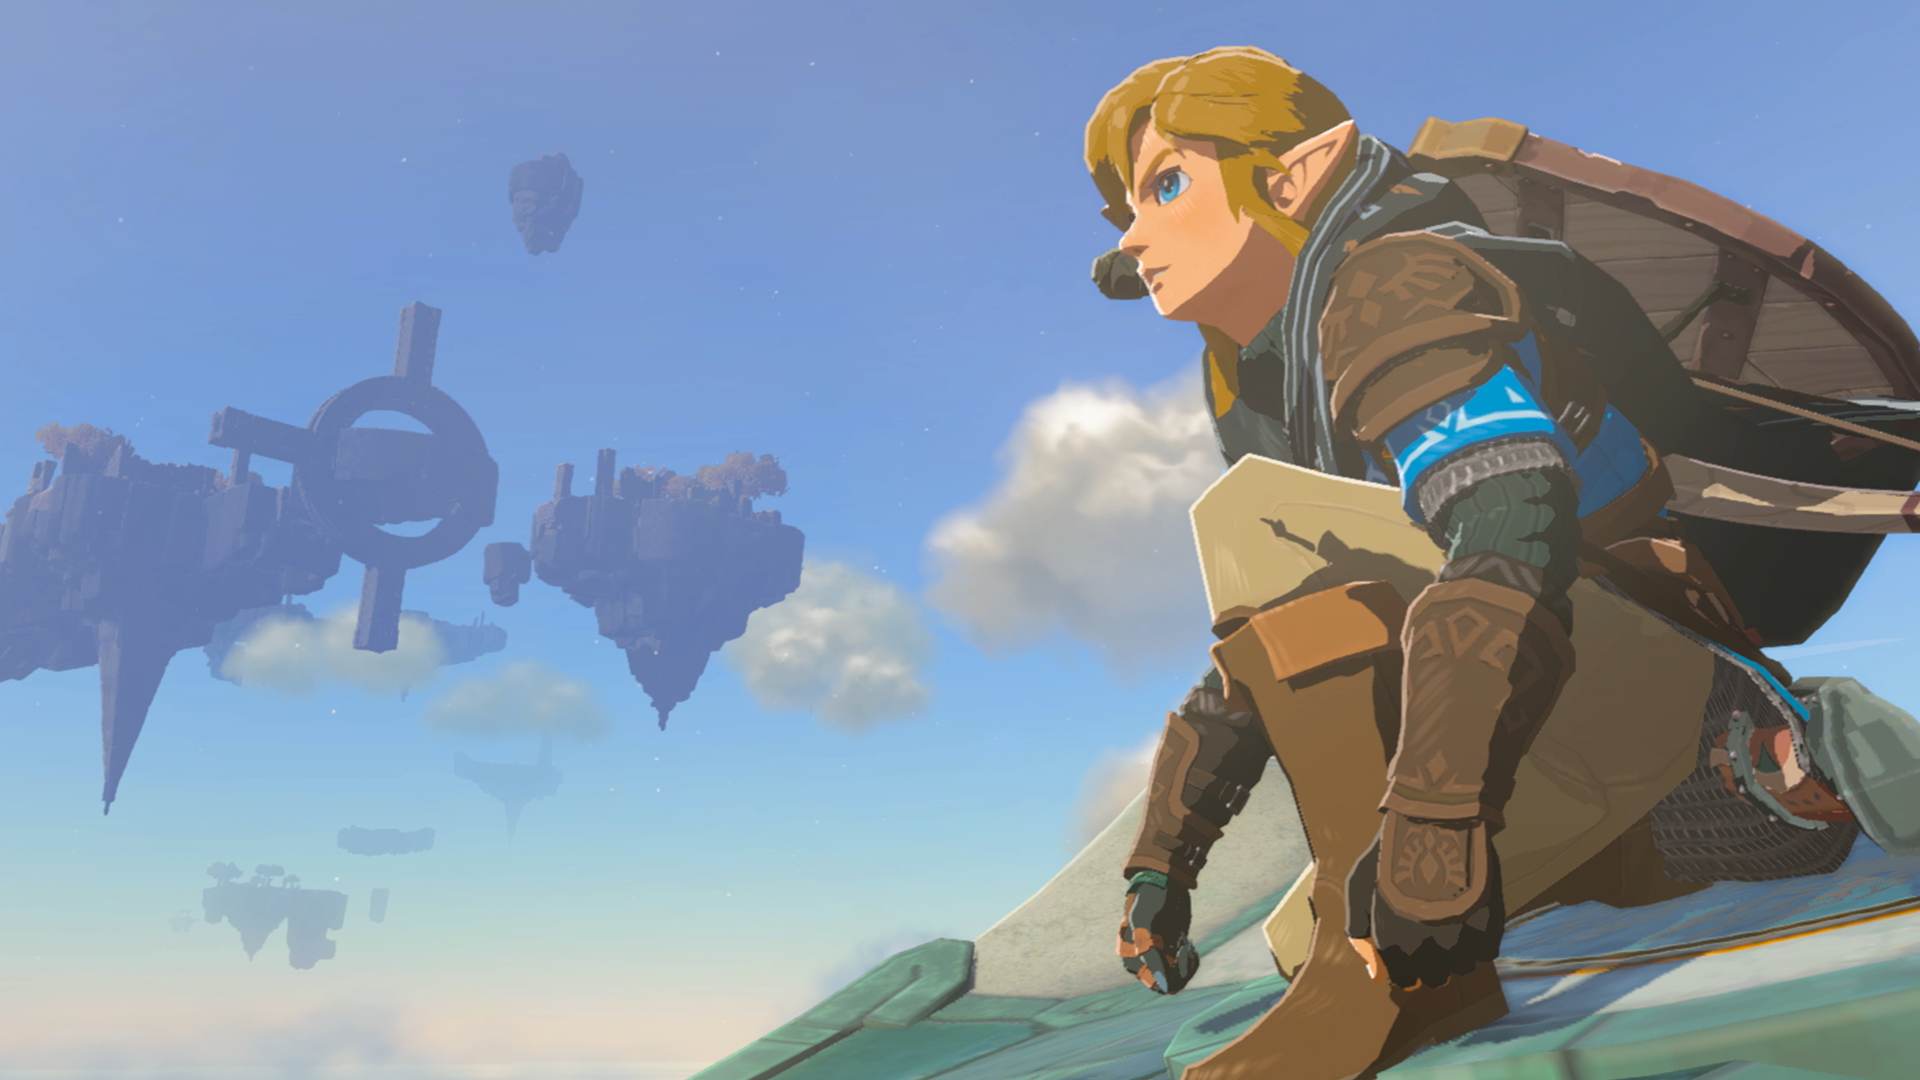 An image of Link soaring through the sky on a Zonai glider. He’s crouching and a big blue sky filled with floating islands is in the background.